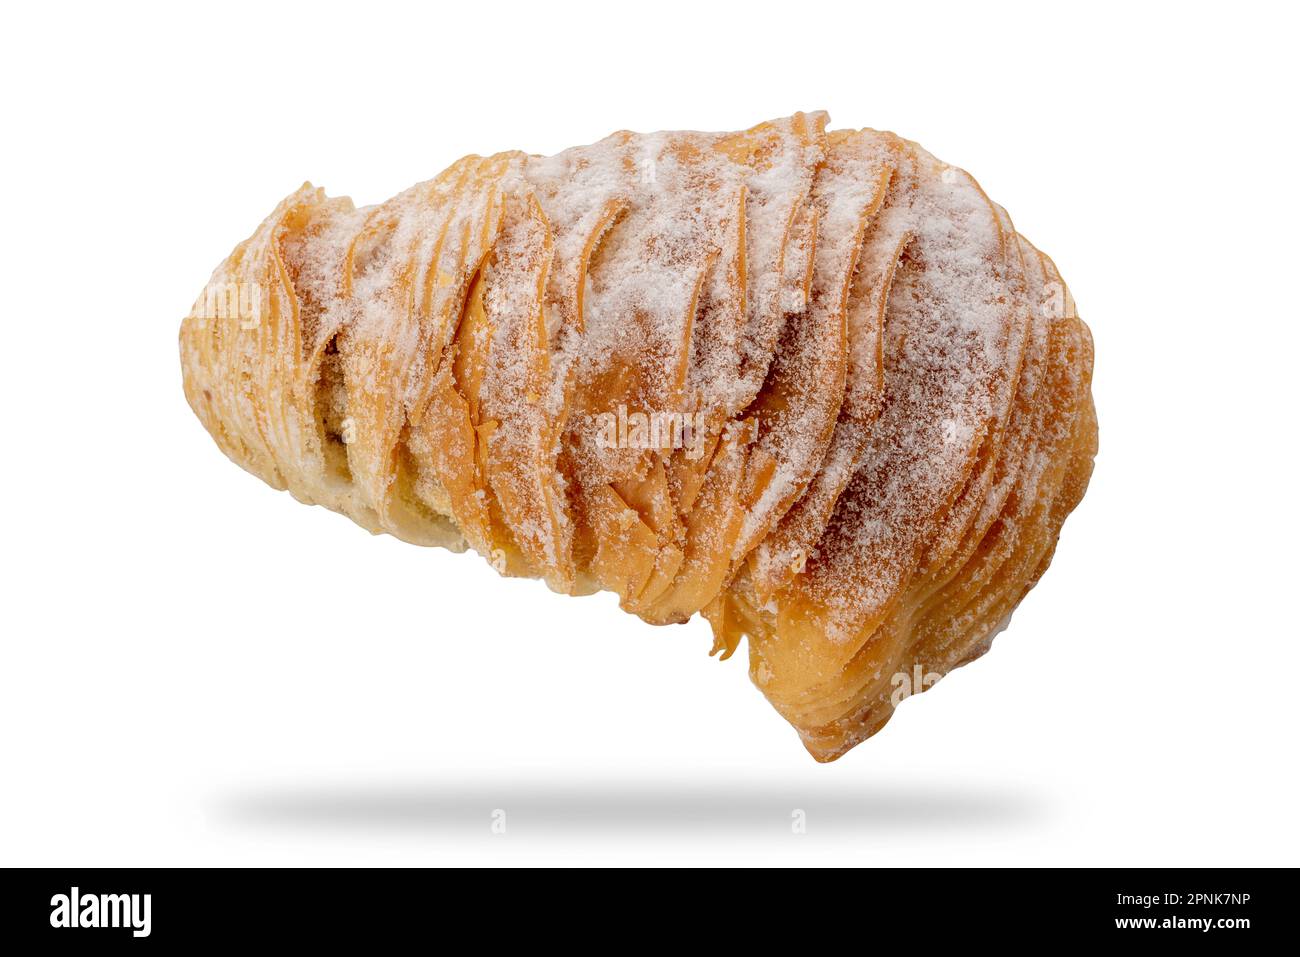 Sfogliatella typical puff pastry from Naples, isolated on white with clipping path inculse Stock Photo